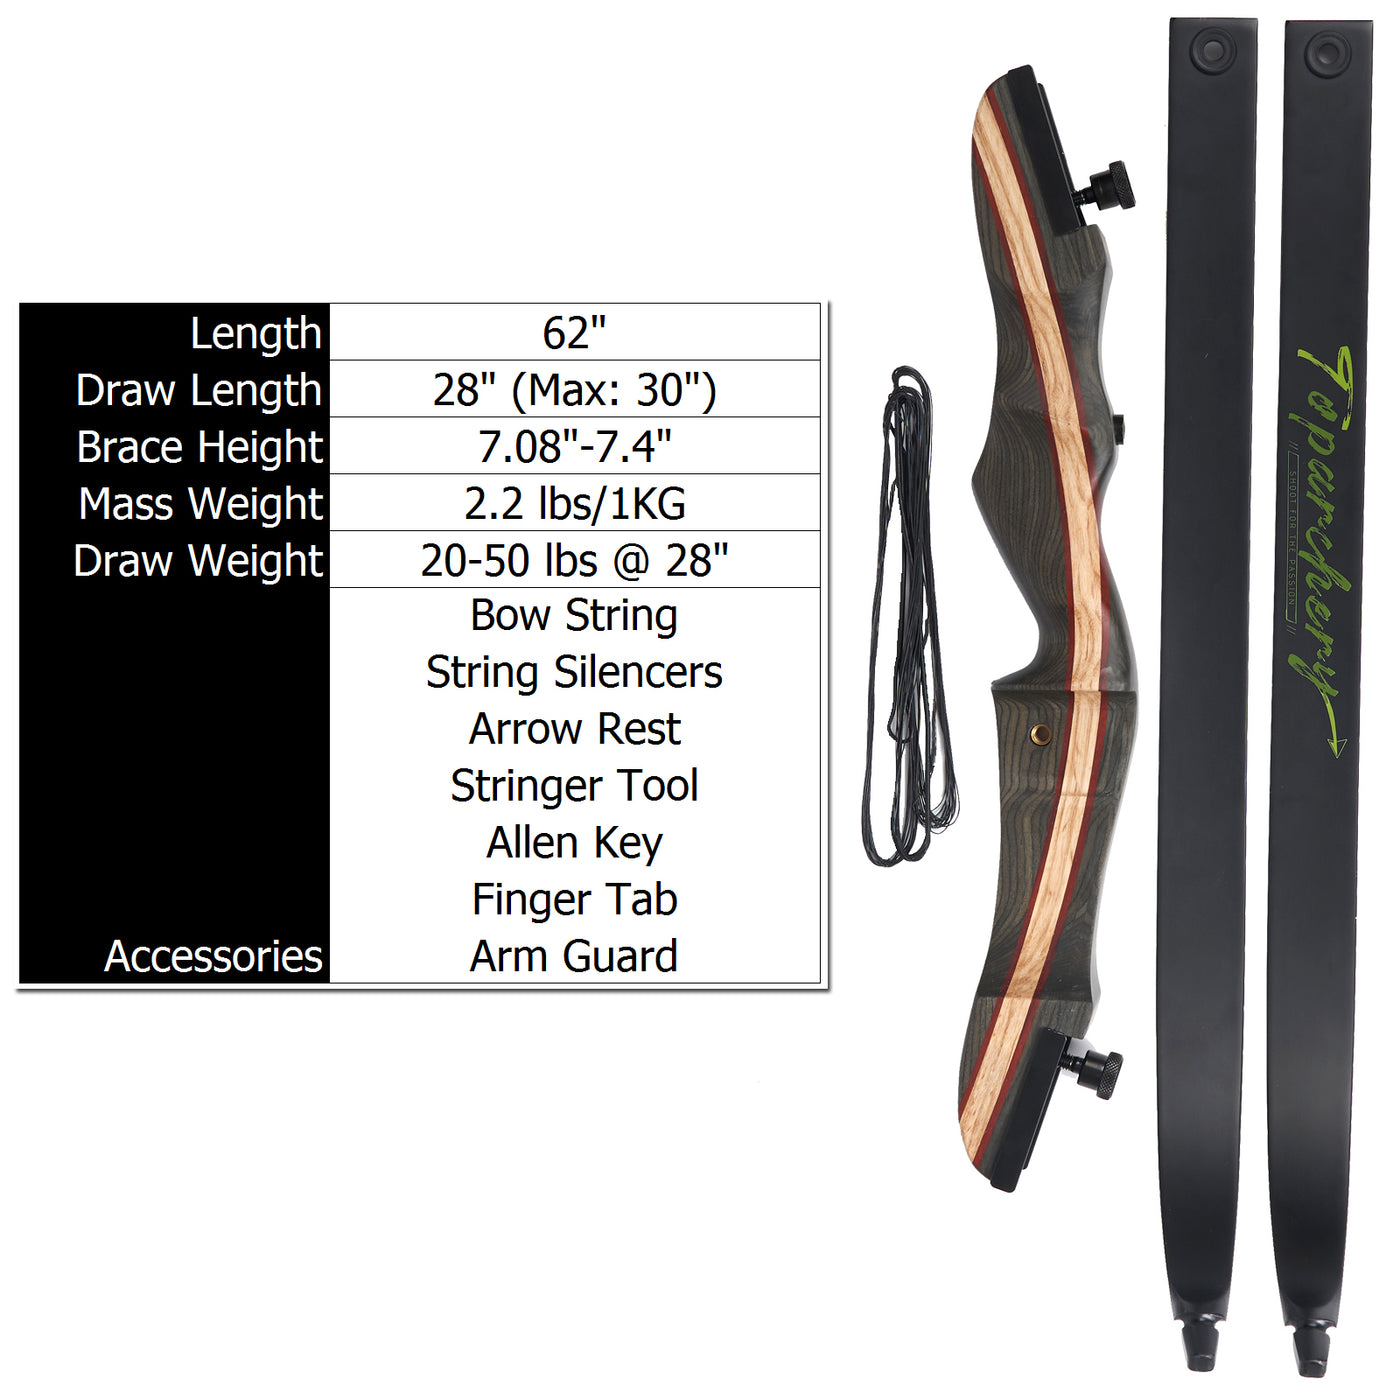 Goblin 62" TopArchery Takedown Recurve Bow Archery for Hunting Targeting Shooting Adults & Youth Wood Riser Laminated 20-50lbs